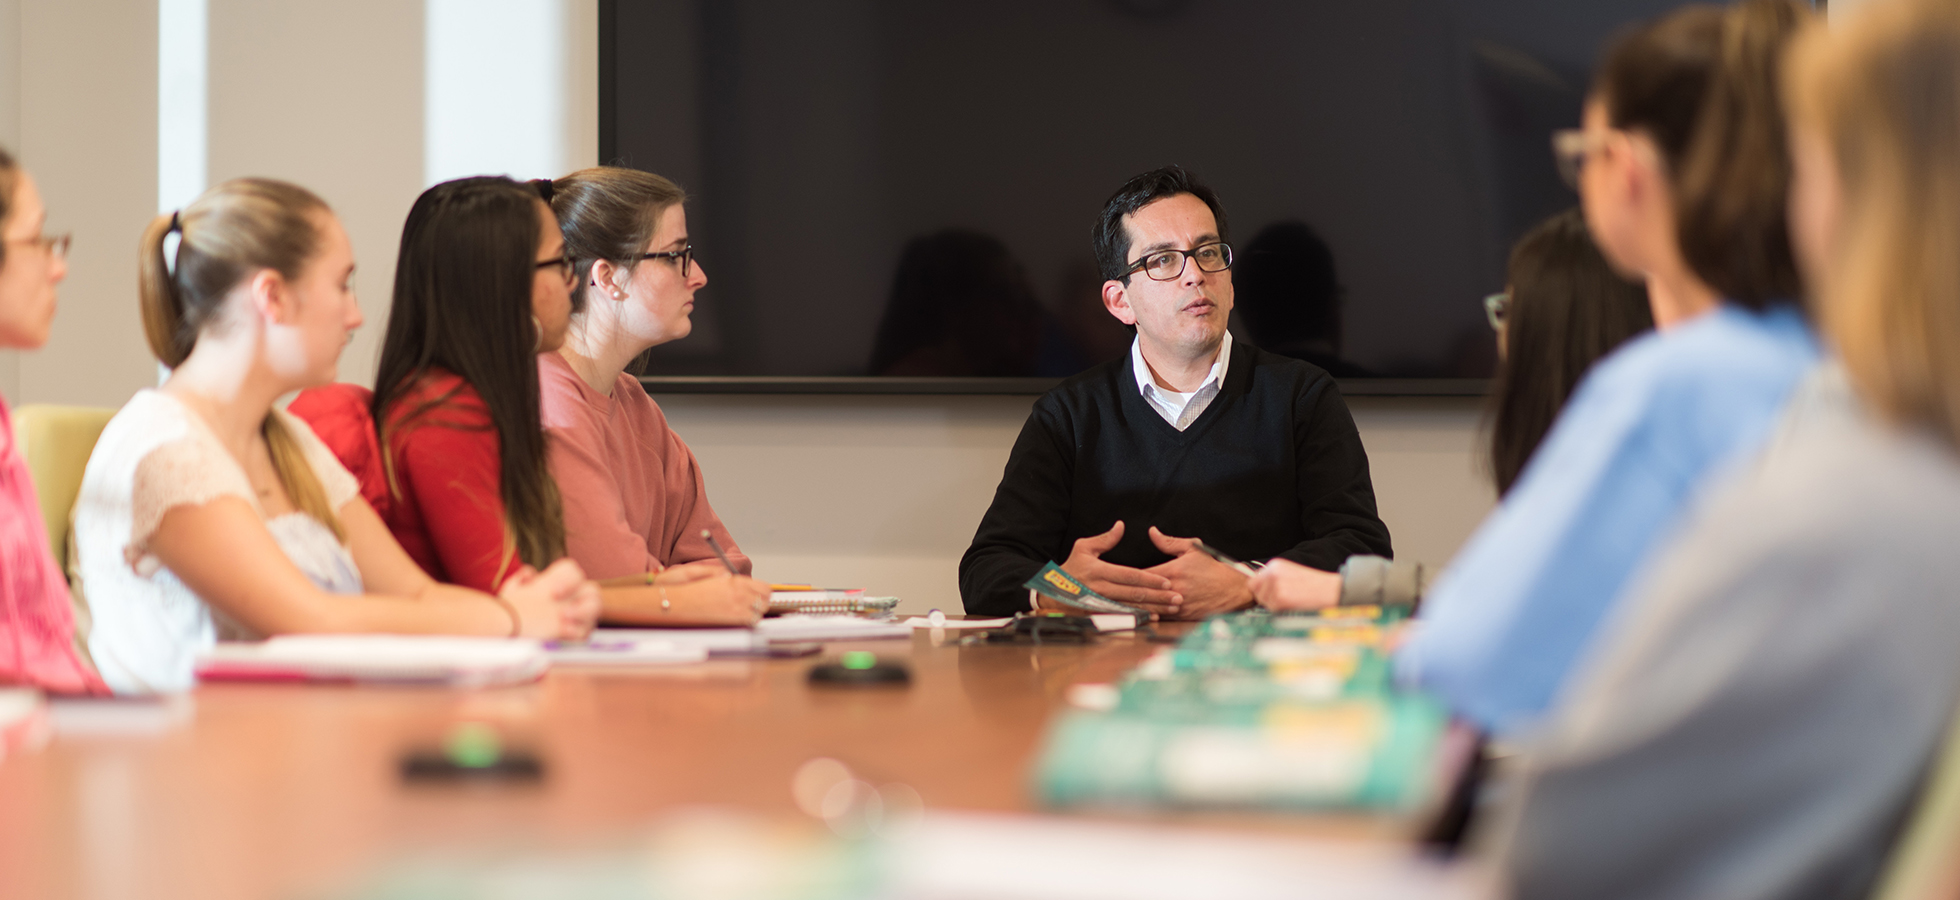 Esteban Loustaunau, Ph.D., Director of Assumption University's Center for Purpose and Vocation discusses with students the exploration of vocation in its many forms — active, contemplative, creative, religious, social, communal, personal, and professional.